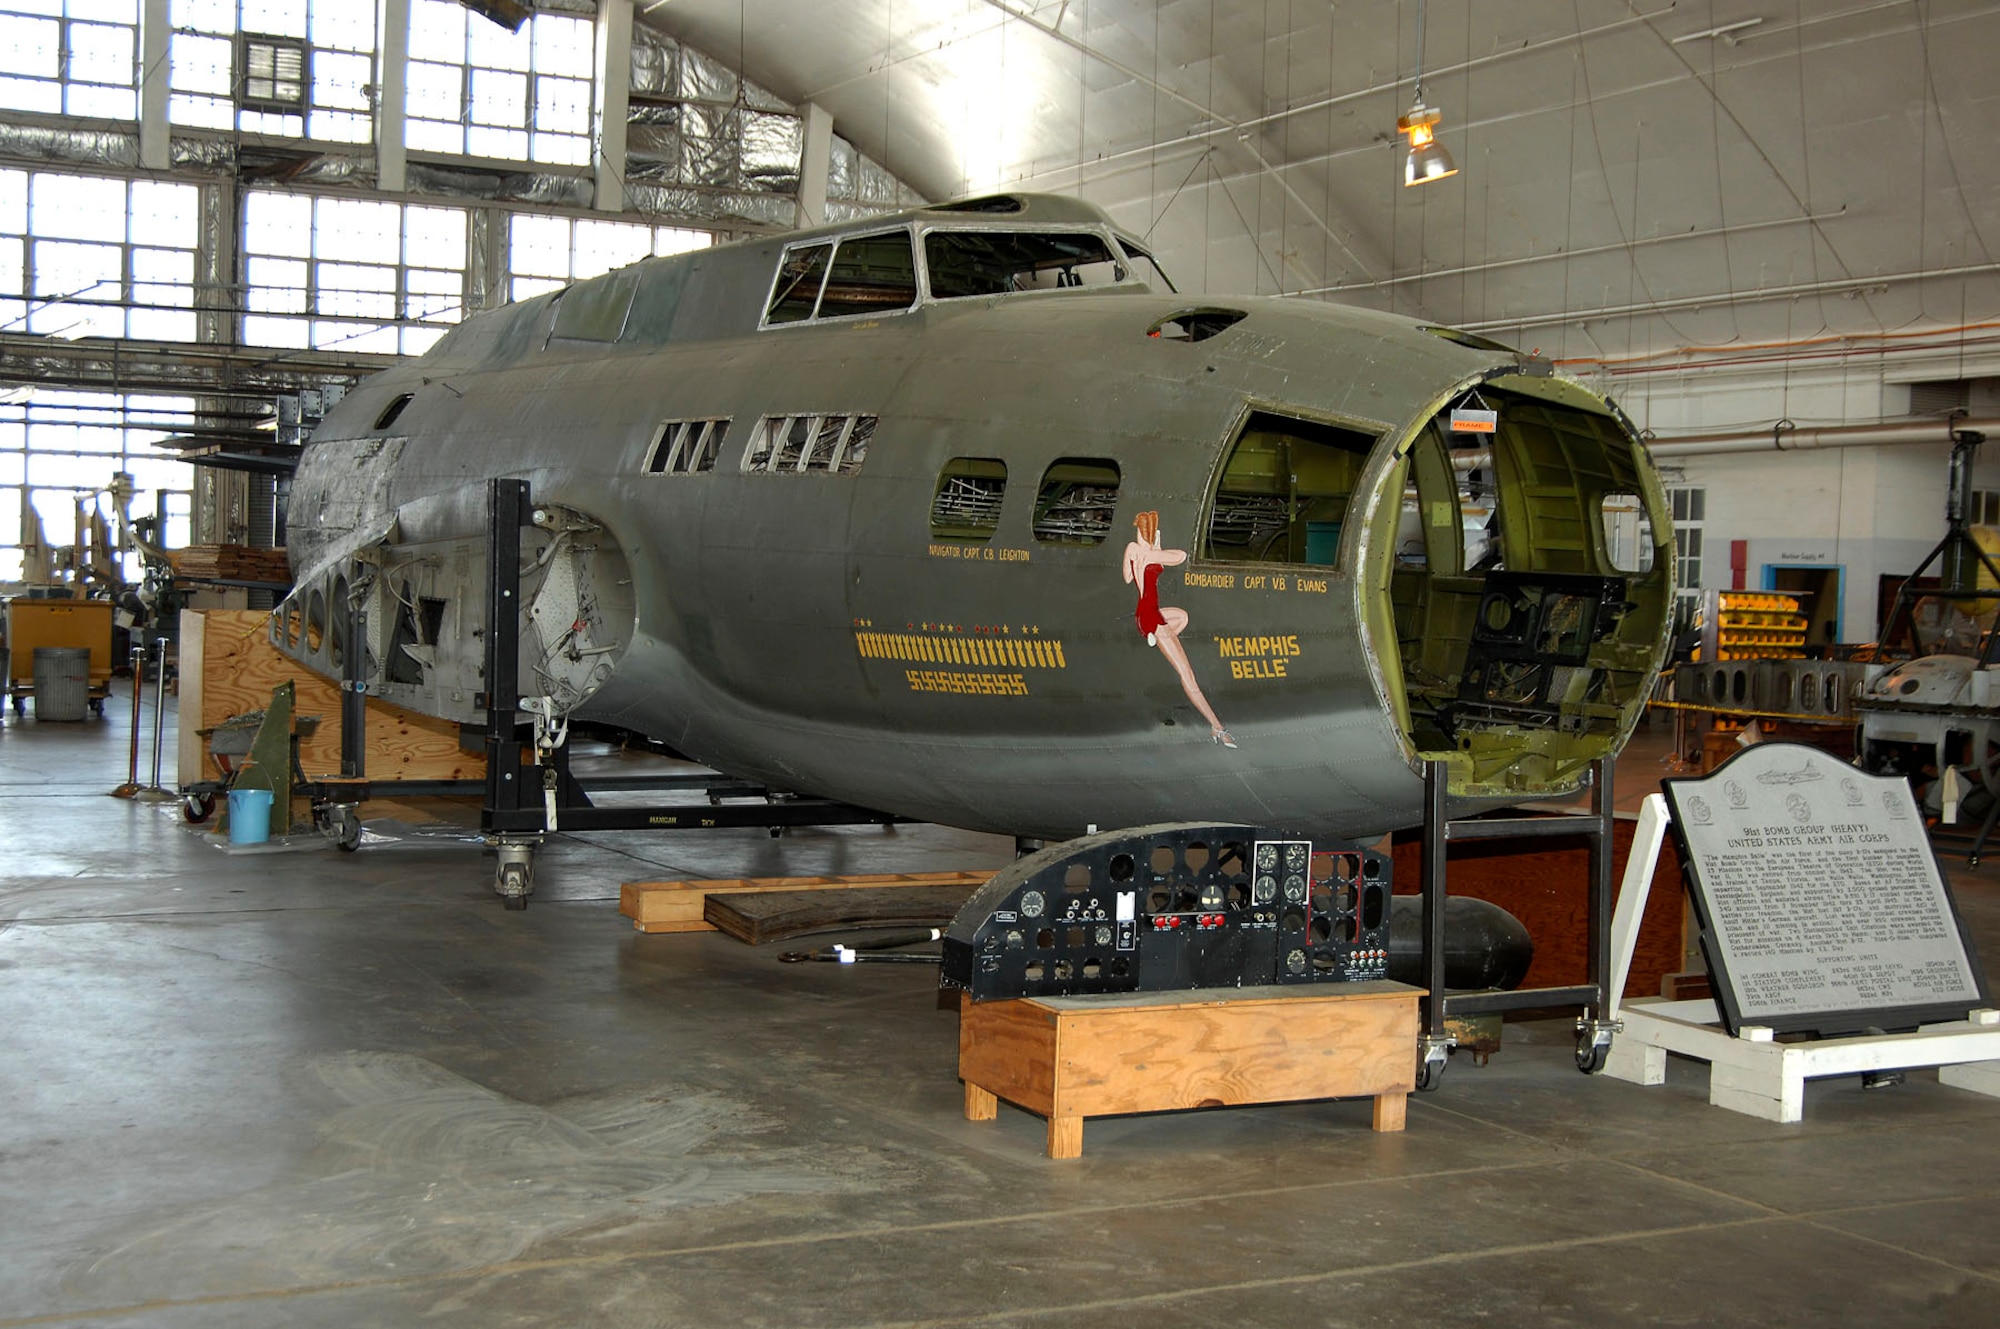 DAYTON, Ohio (02/2007) - The B-17F "Memphis Belle" undergoing restoration at the National Museum of the U.S. Air Force. (U.S. Air Force photo by Ben Strasser)